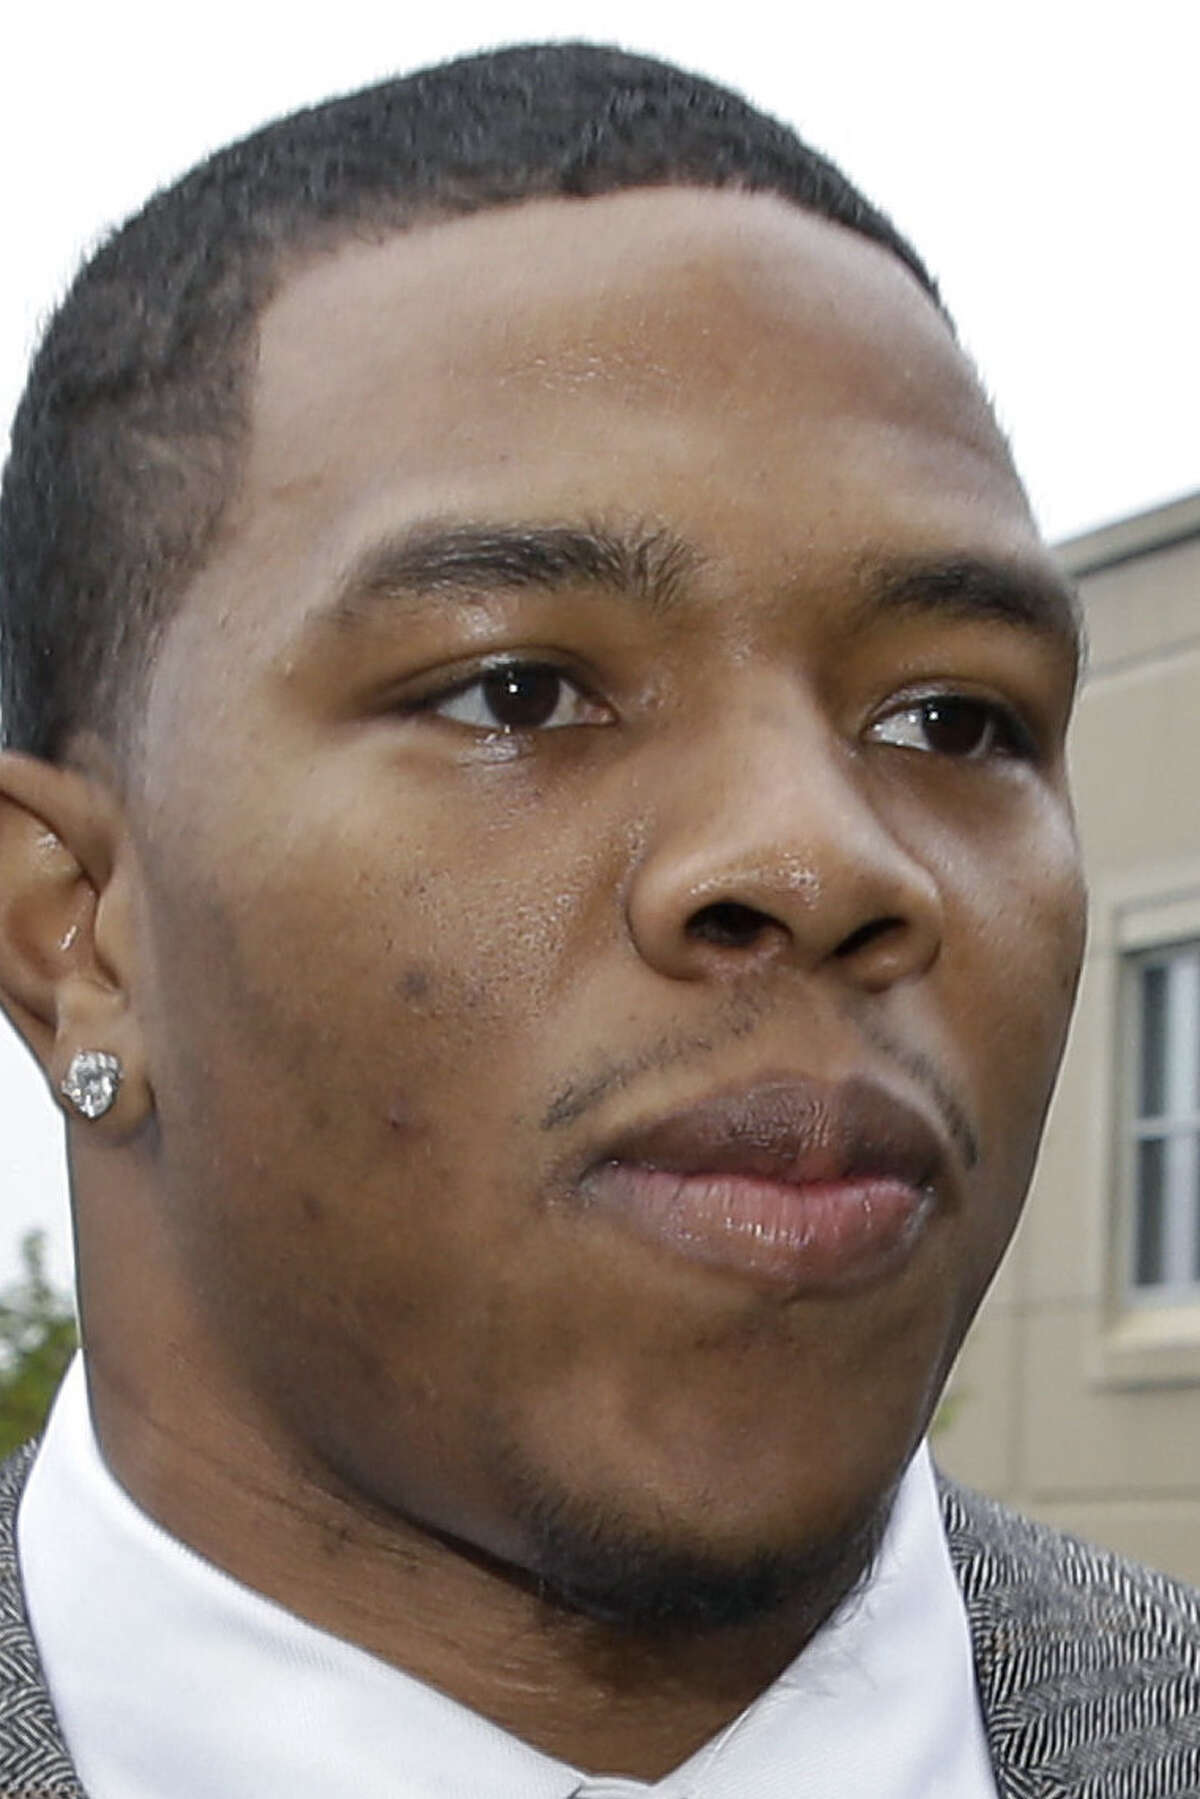 Ray Rice also is suspended indefinitely after TMZ released video of him punching his then-fiancée.